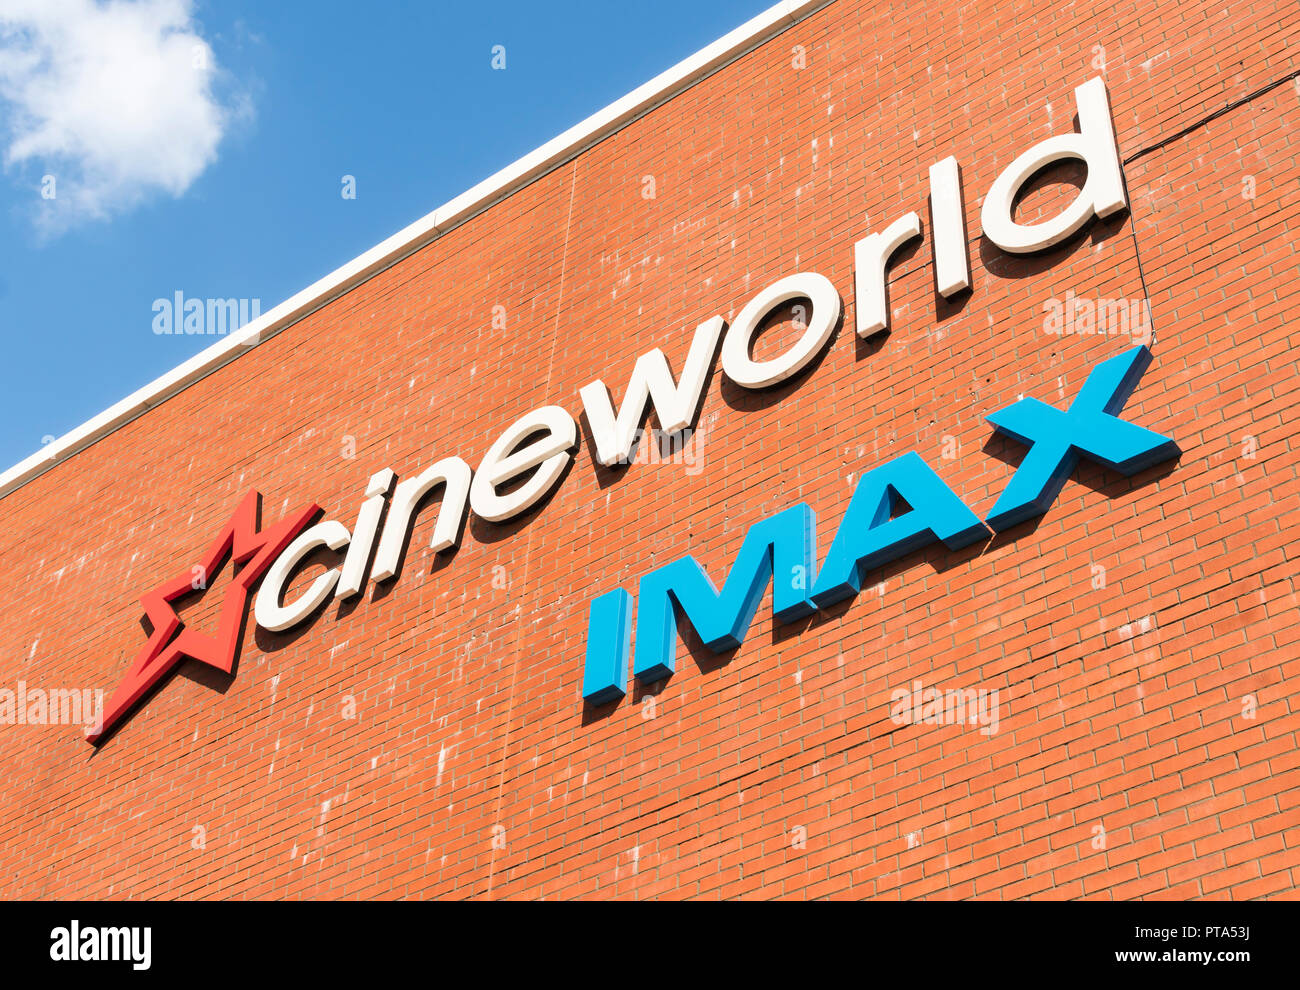 Cineworld Imax cinema sign on the side of a tall brick building wall in England, UK. Stock Photo